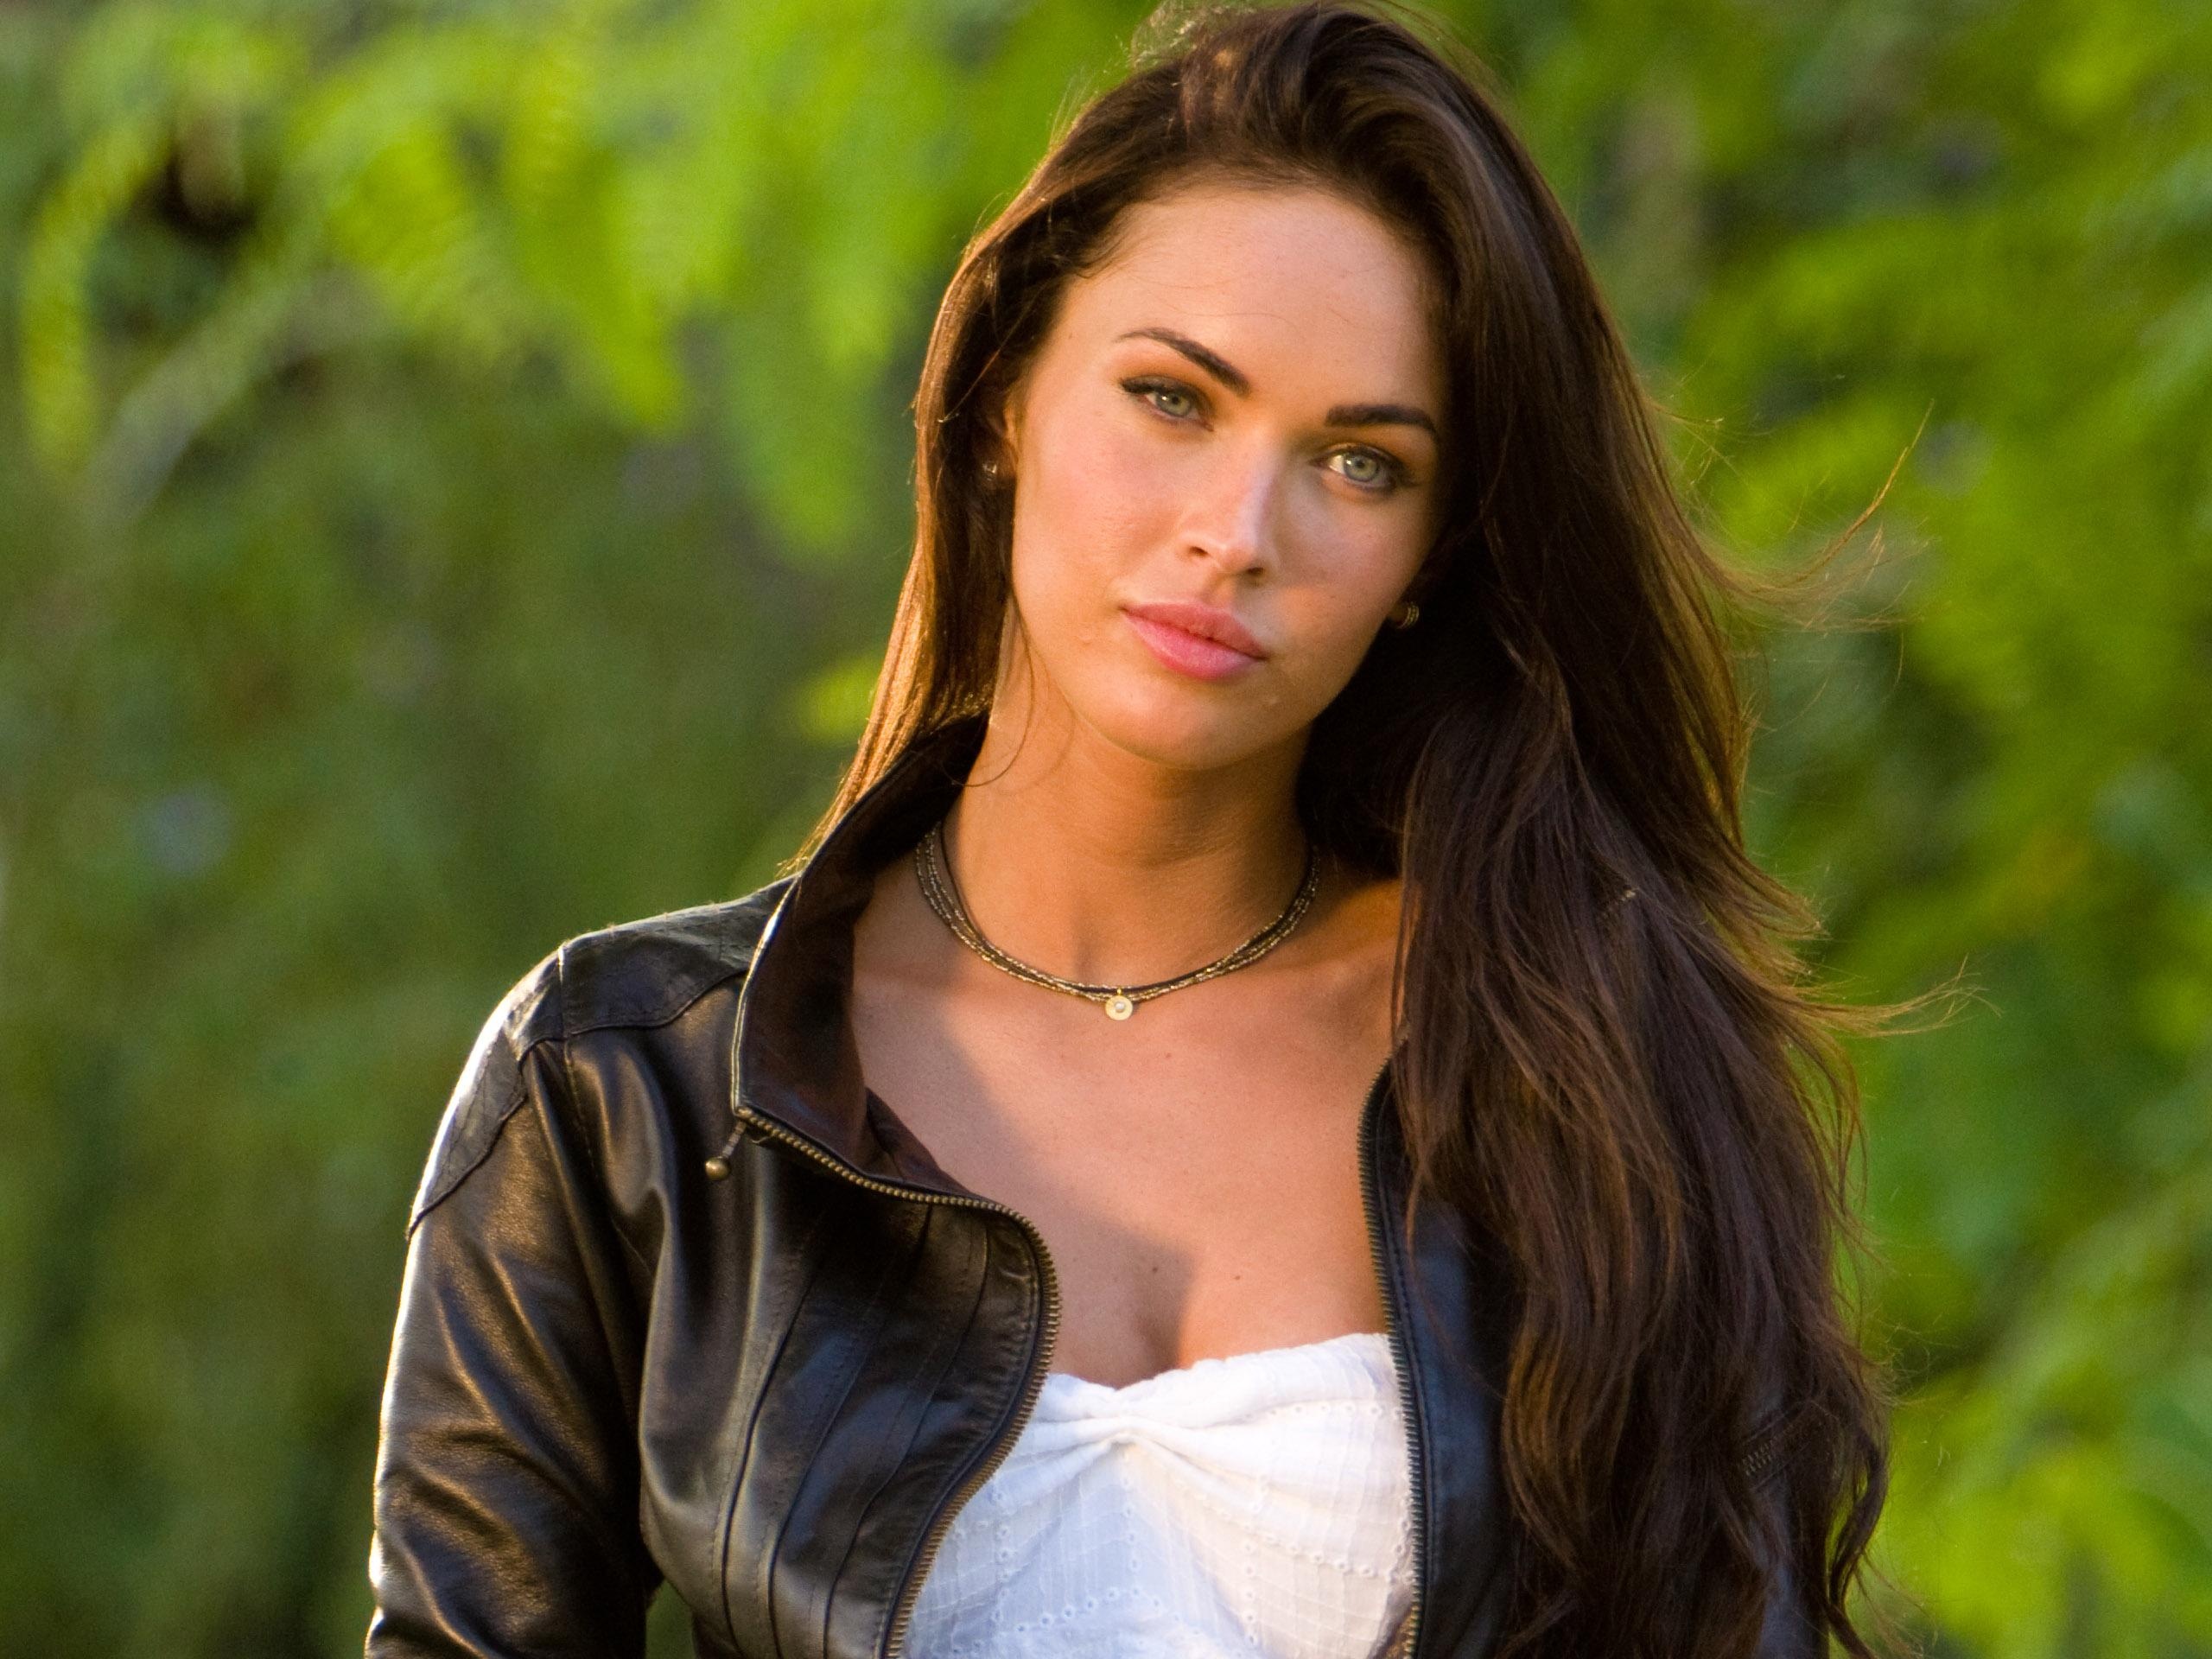 Megan Fox: Starred in the thriller Midnight in the Switchgrass opposite Emile Hirsch and Bruce Willis, directed by Randall Emmett, and Till Death, directed by S.K. Dale. 2560x1920 HD Wallpaper.